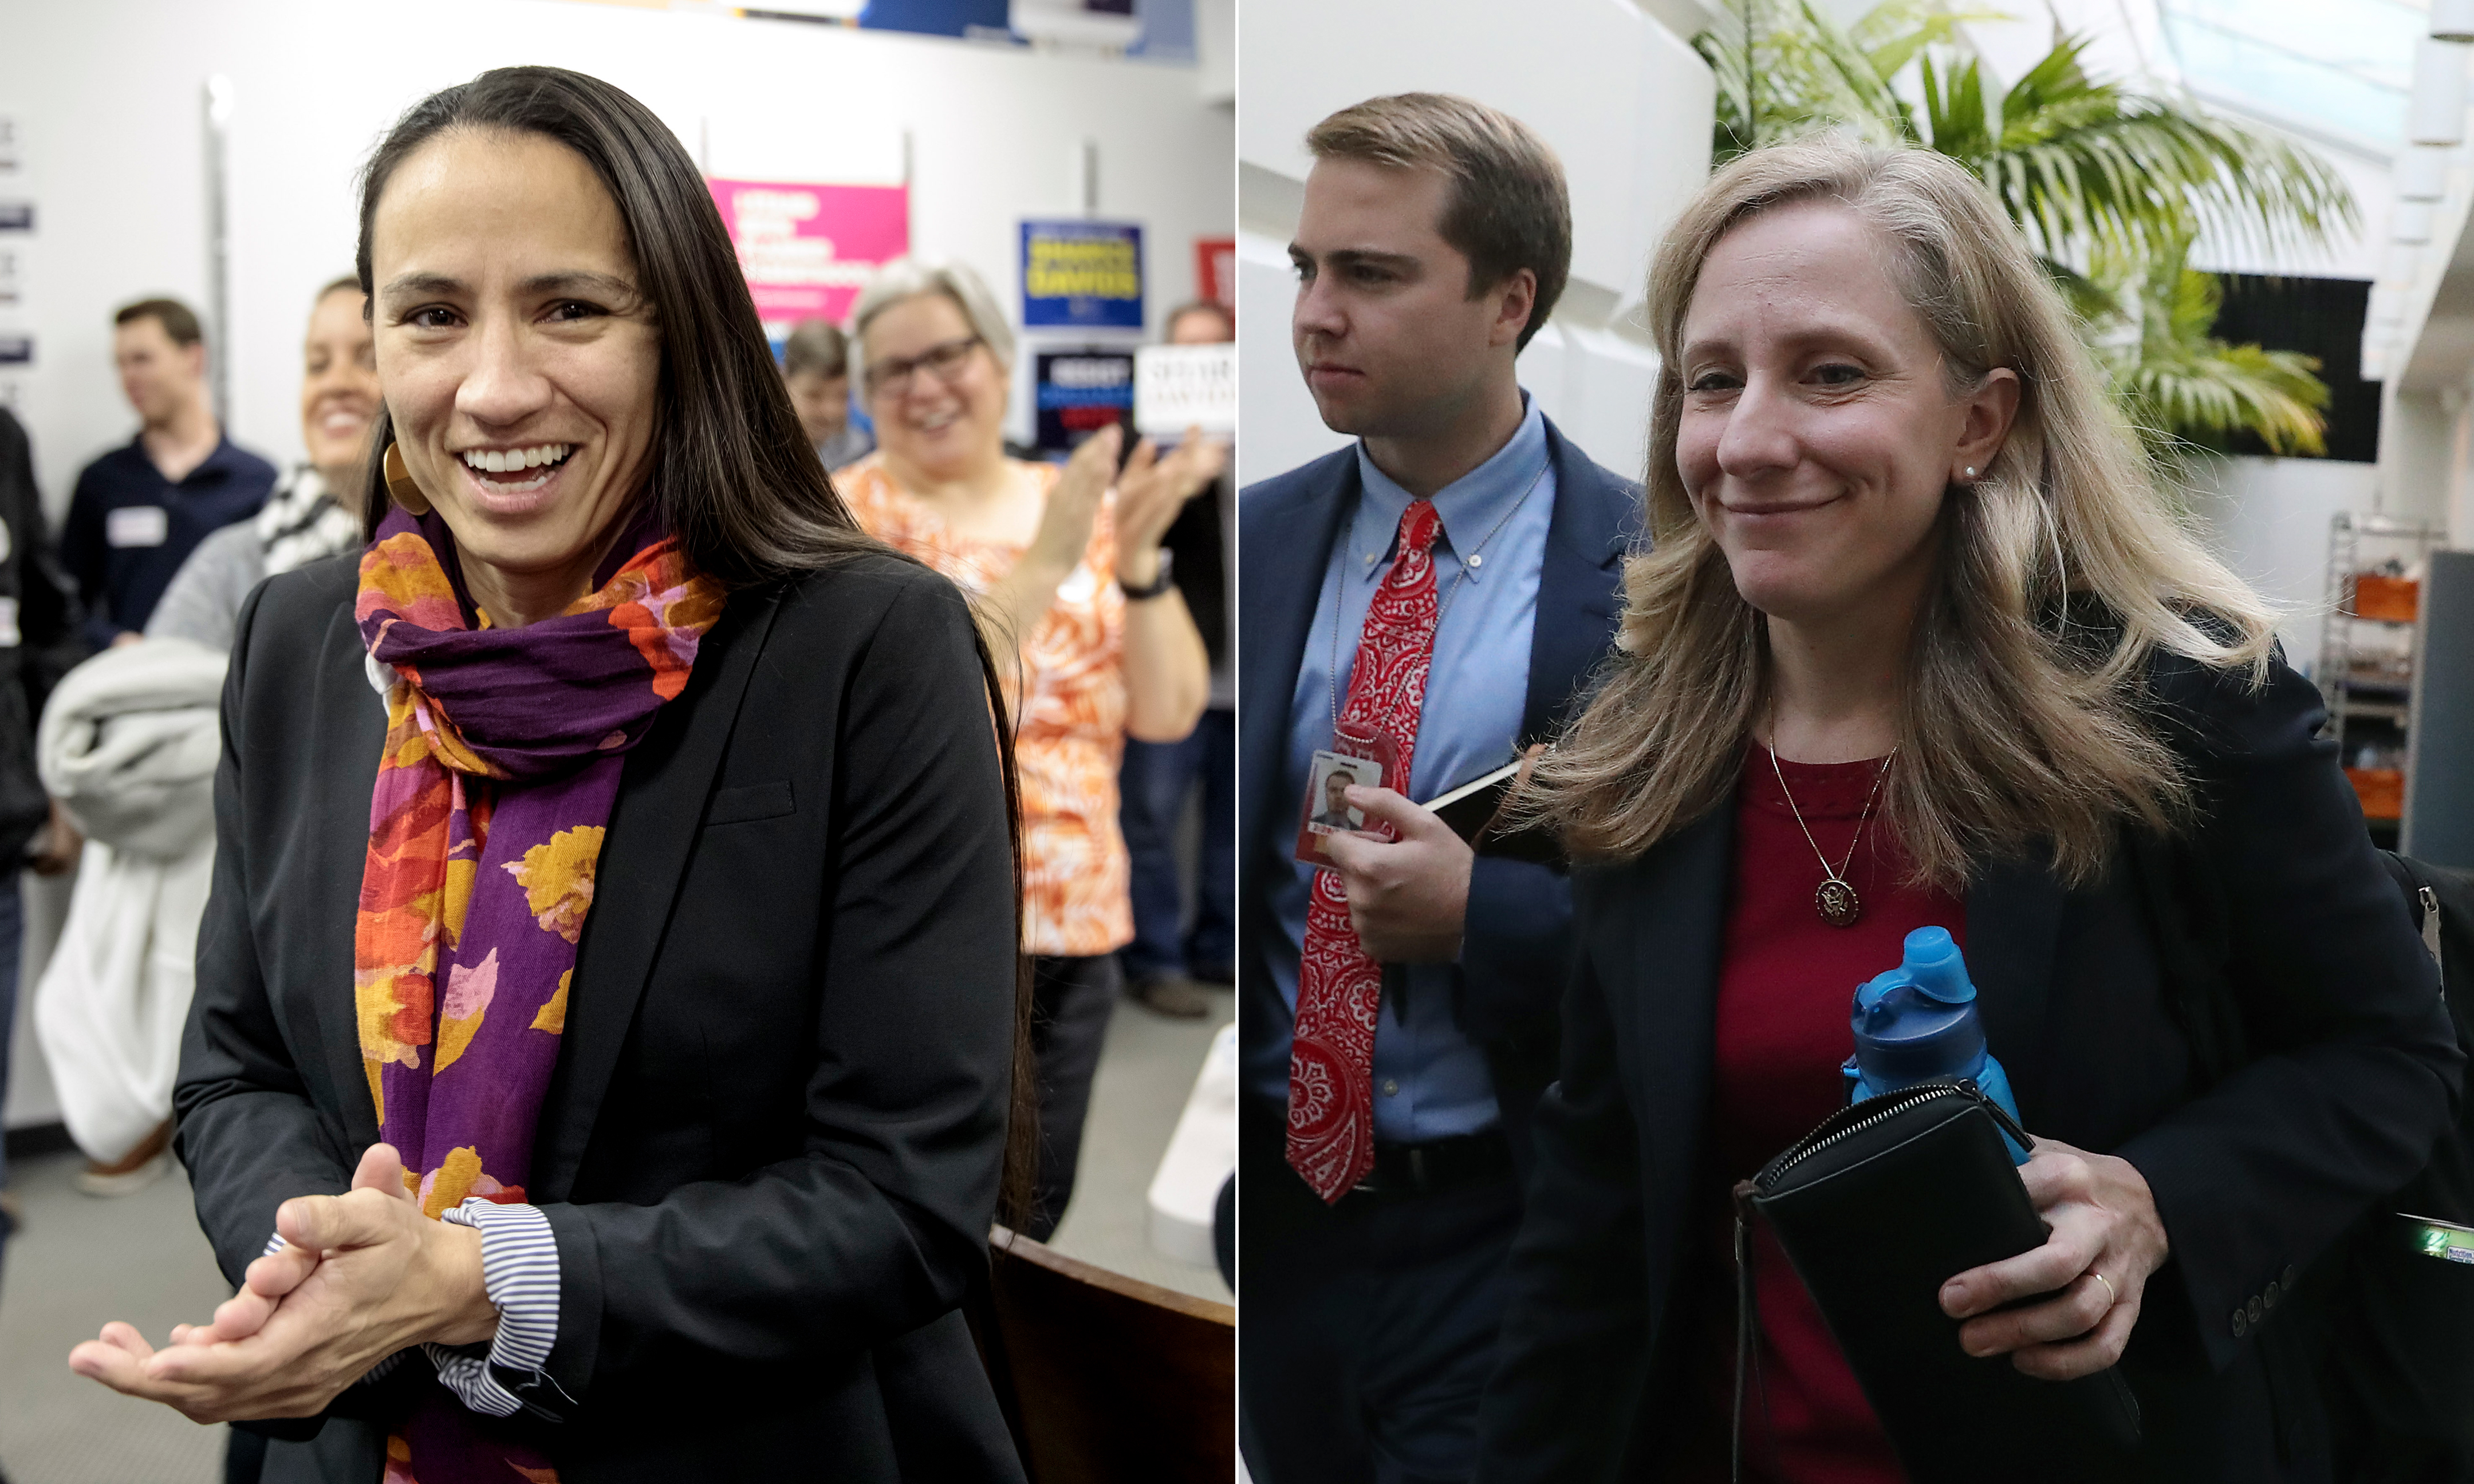 Two images, side by side, of Sharice Davids smiling on the left and Abigail Spanberger leaving a meeting on the right